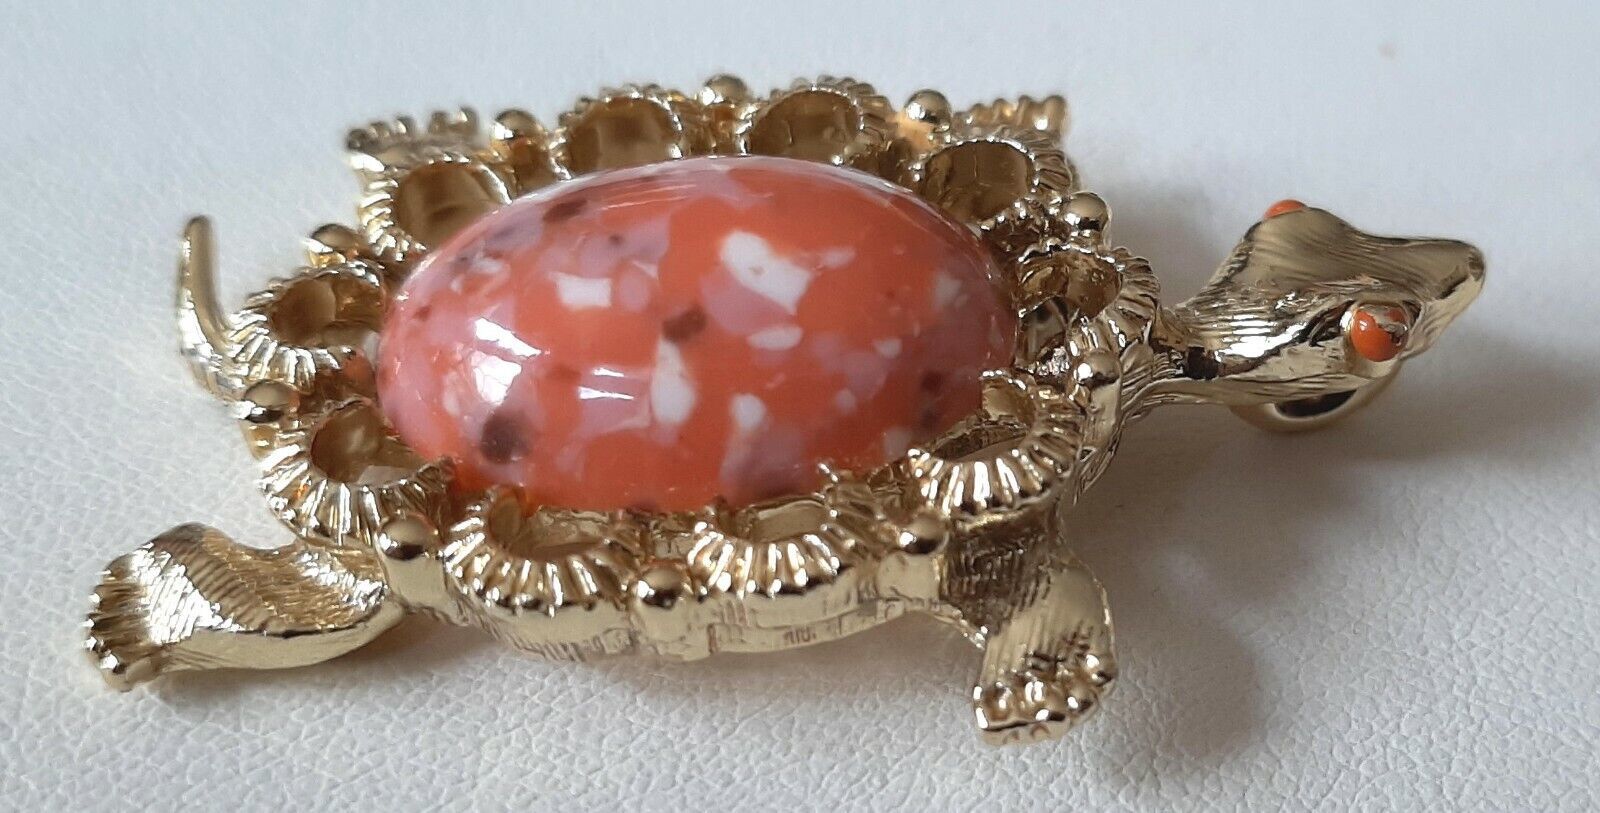 Primary image for GERRY'S Turtle Brooch Pin Pendant Pink Speckled Cabochon Gold Tone Setting 1970s